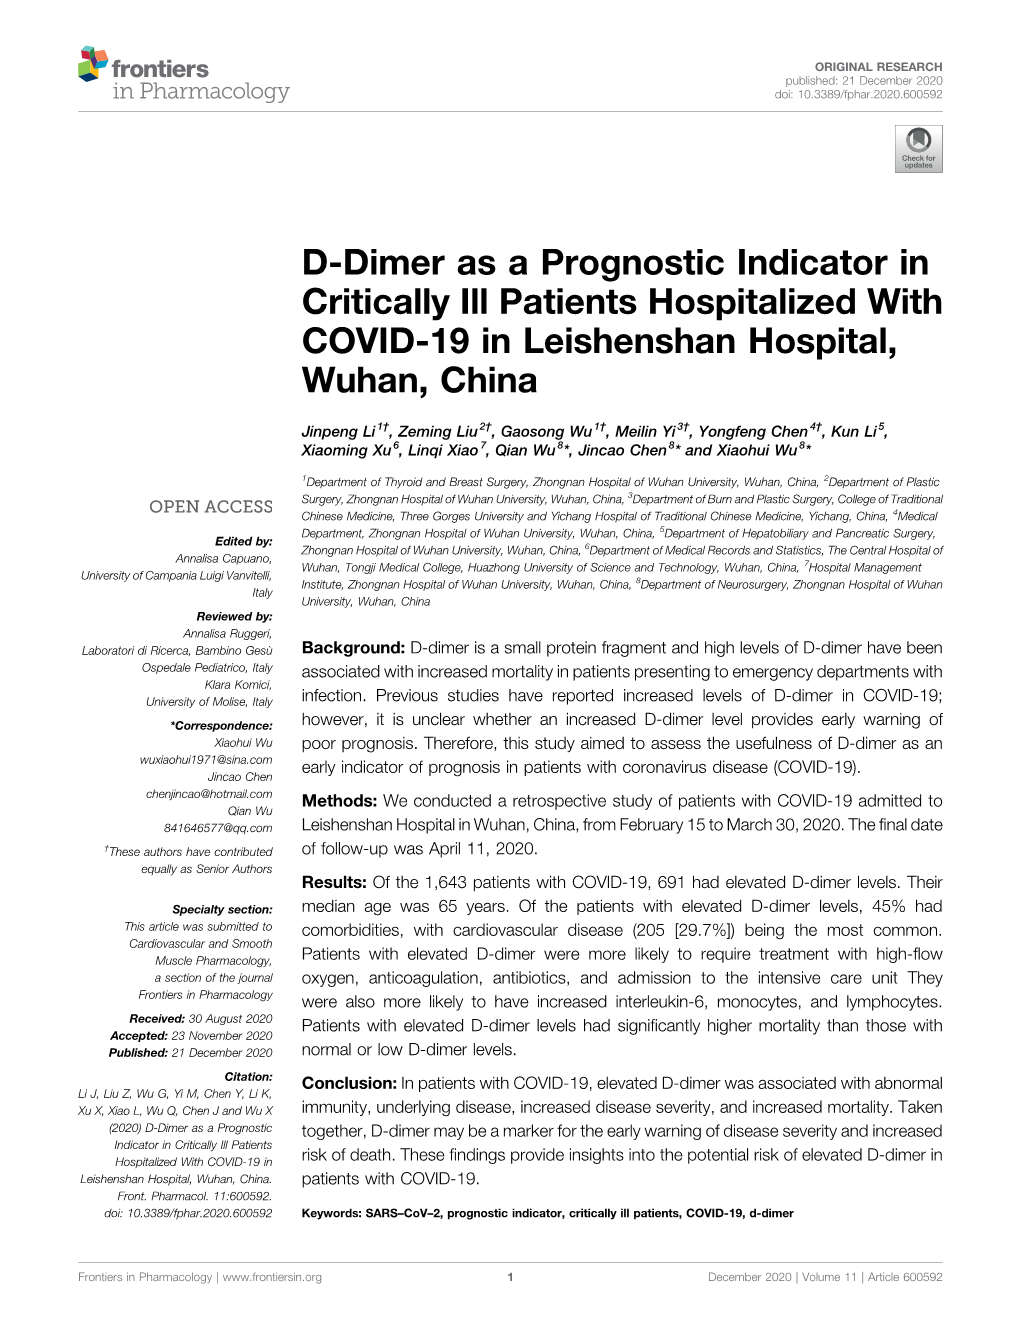 D-Dimer As a Prognostic Indicator in Critically Ill Patients Hospitalized with COVID-19 in Leishenshan Hospital, Wuhan, China